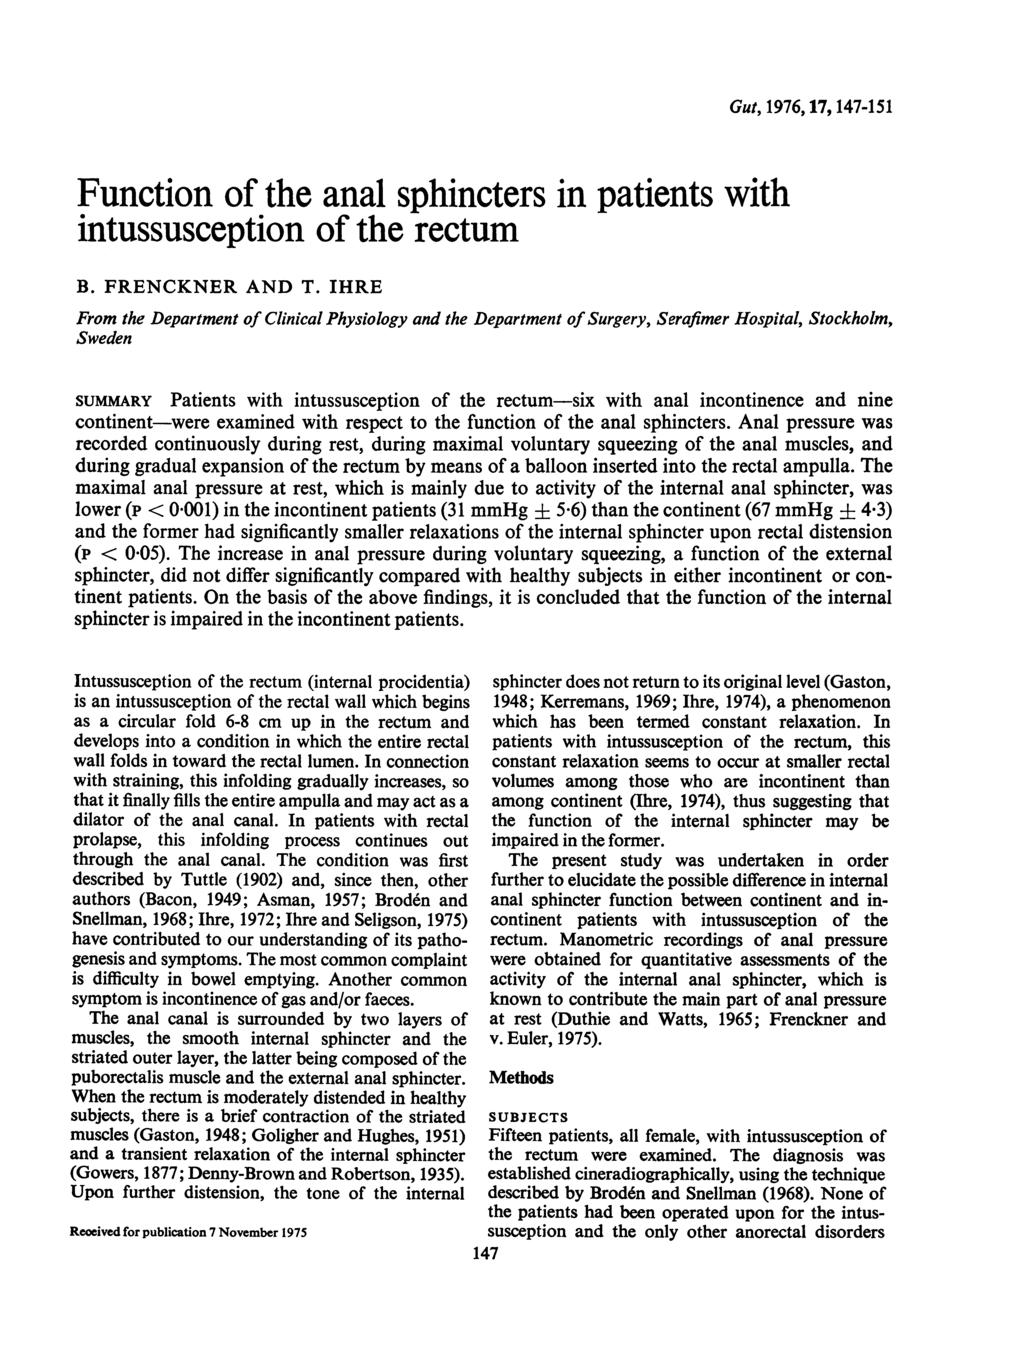 Function of the anal sphincters in patients with intussusception of the rectum B. FRENCKNER AND T.